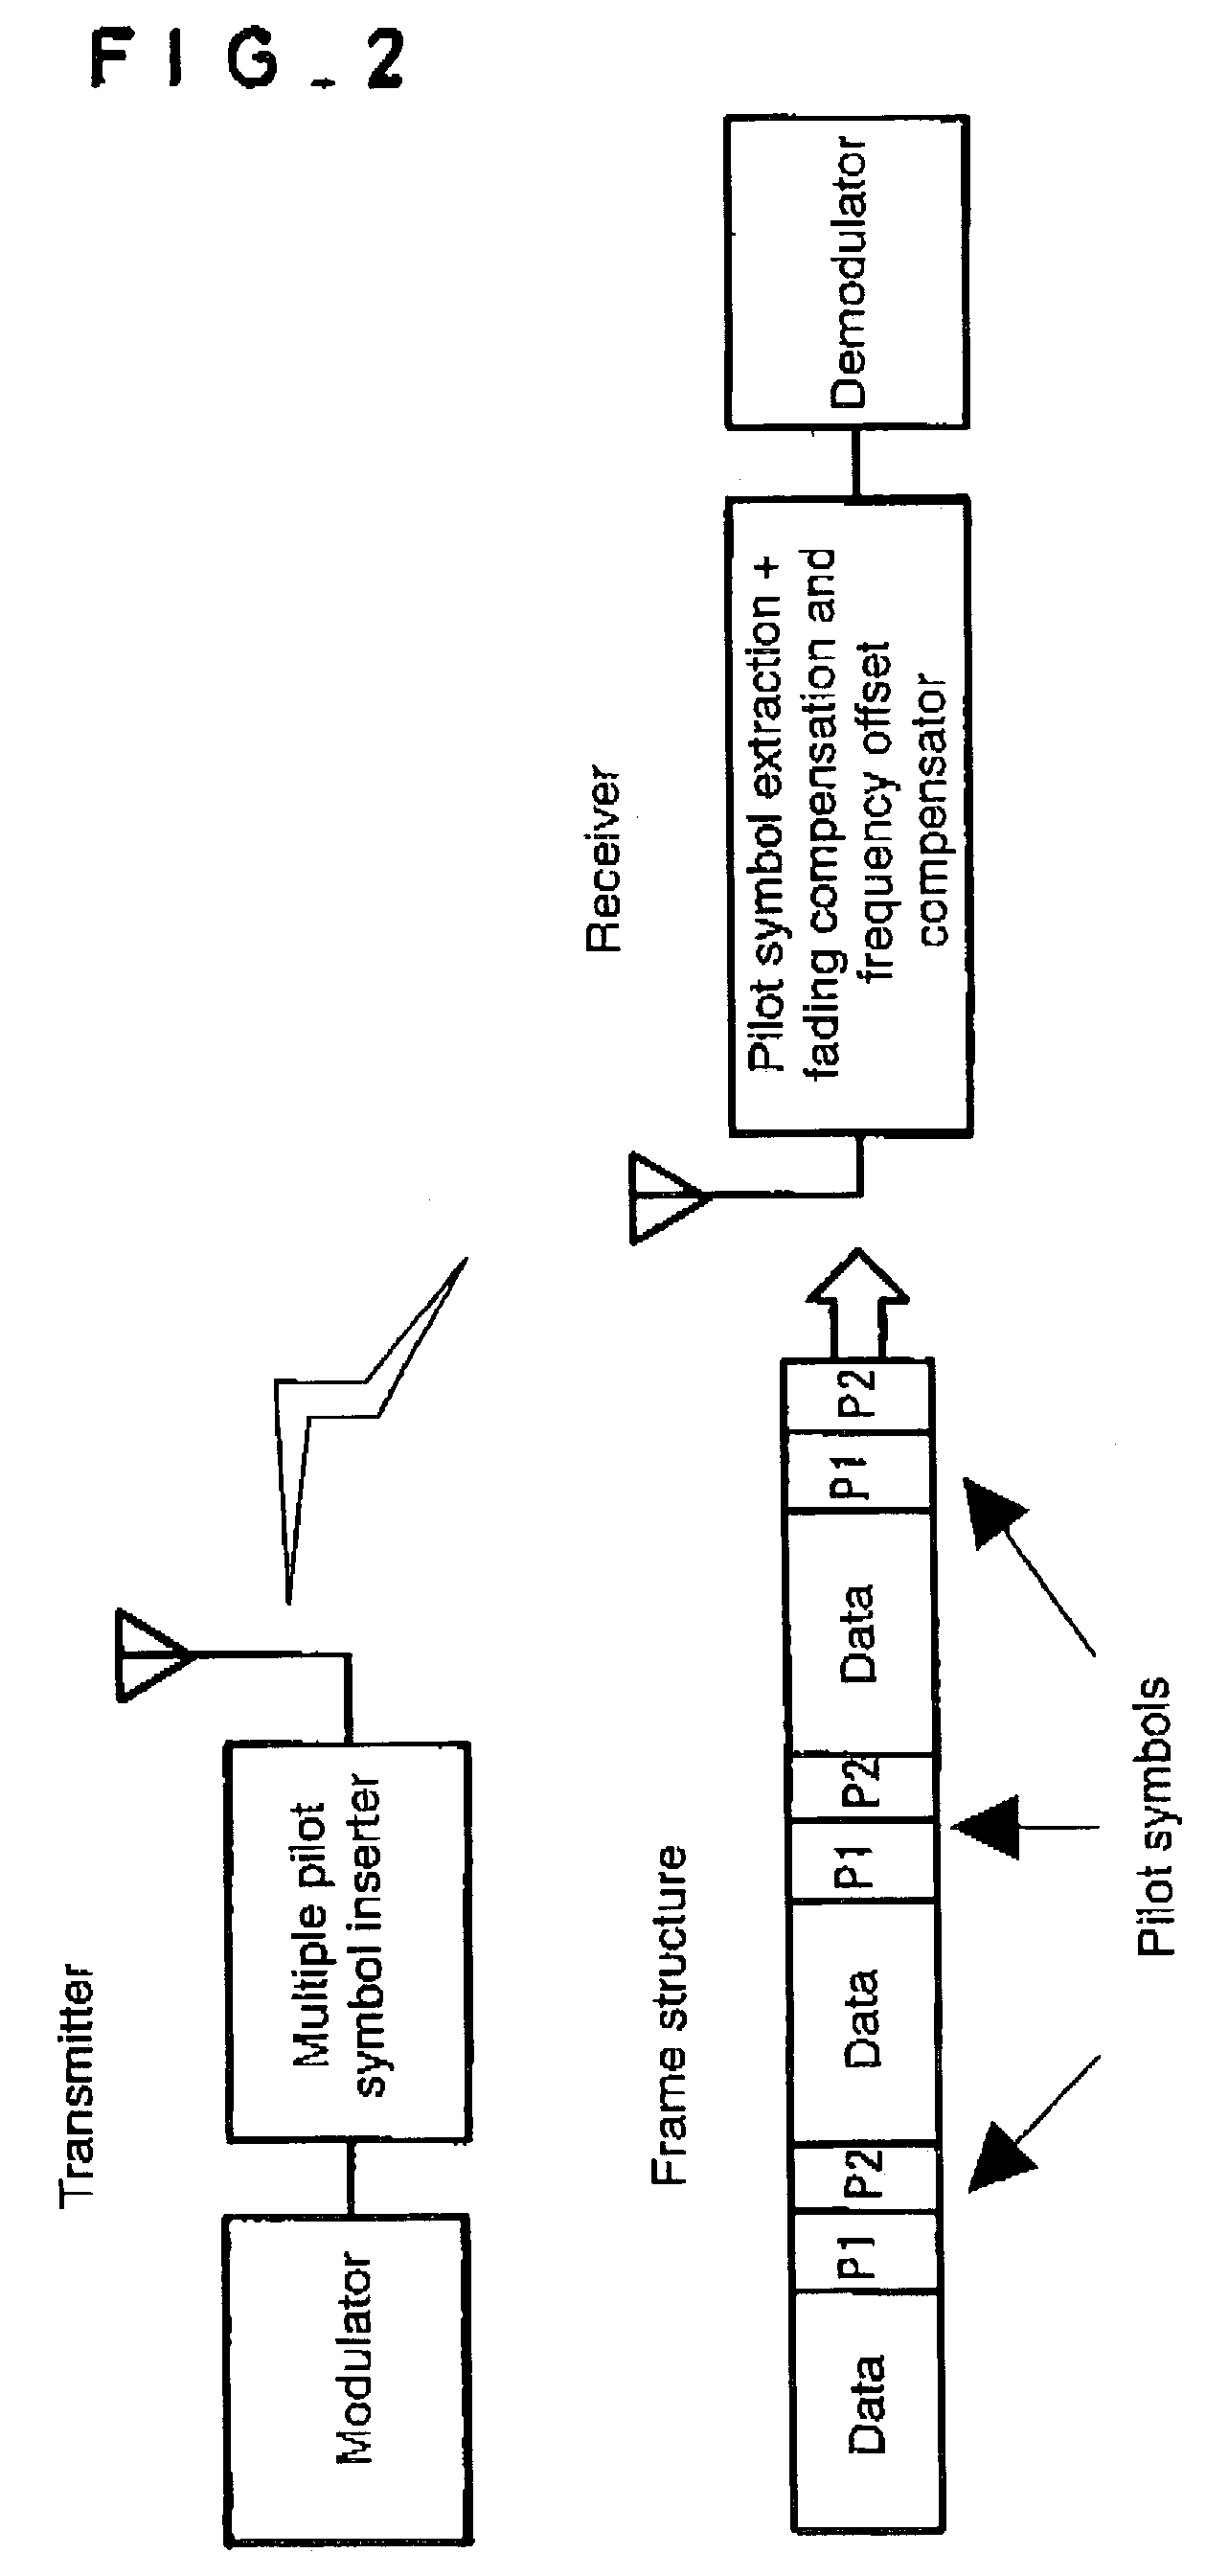 Transmission method with fading distortion or frequency offset compensation